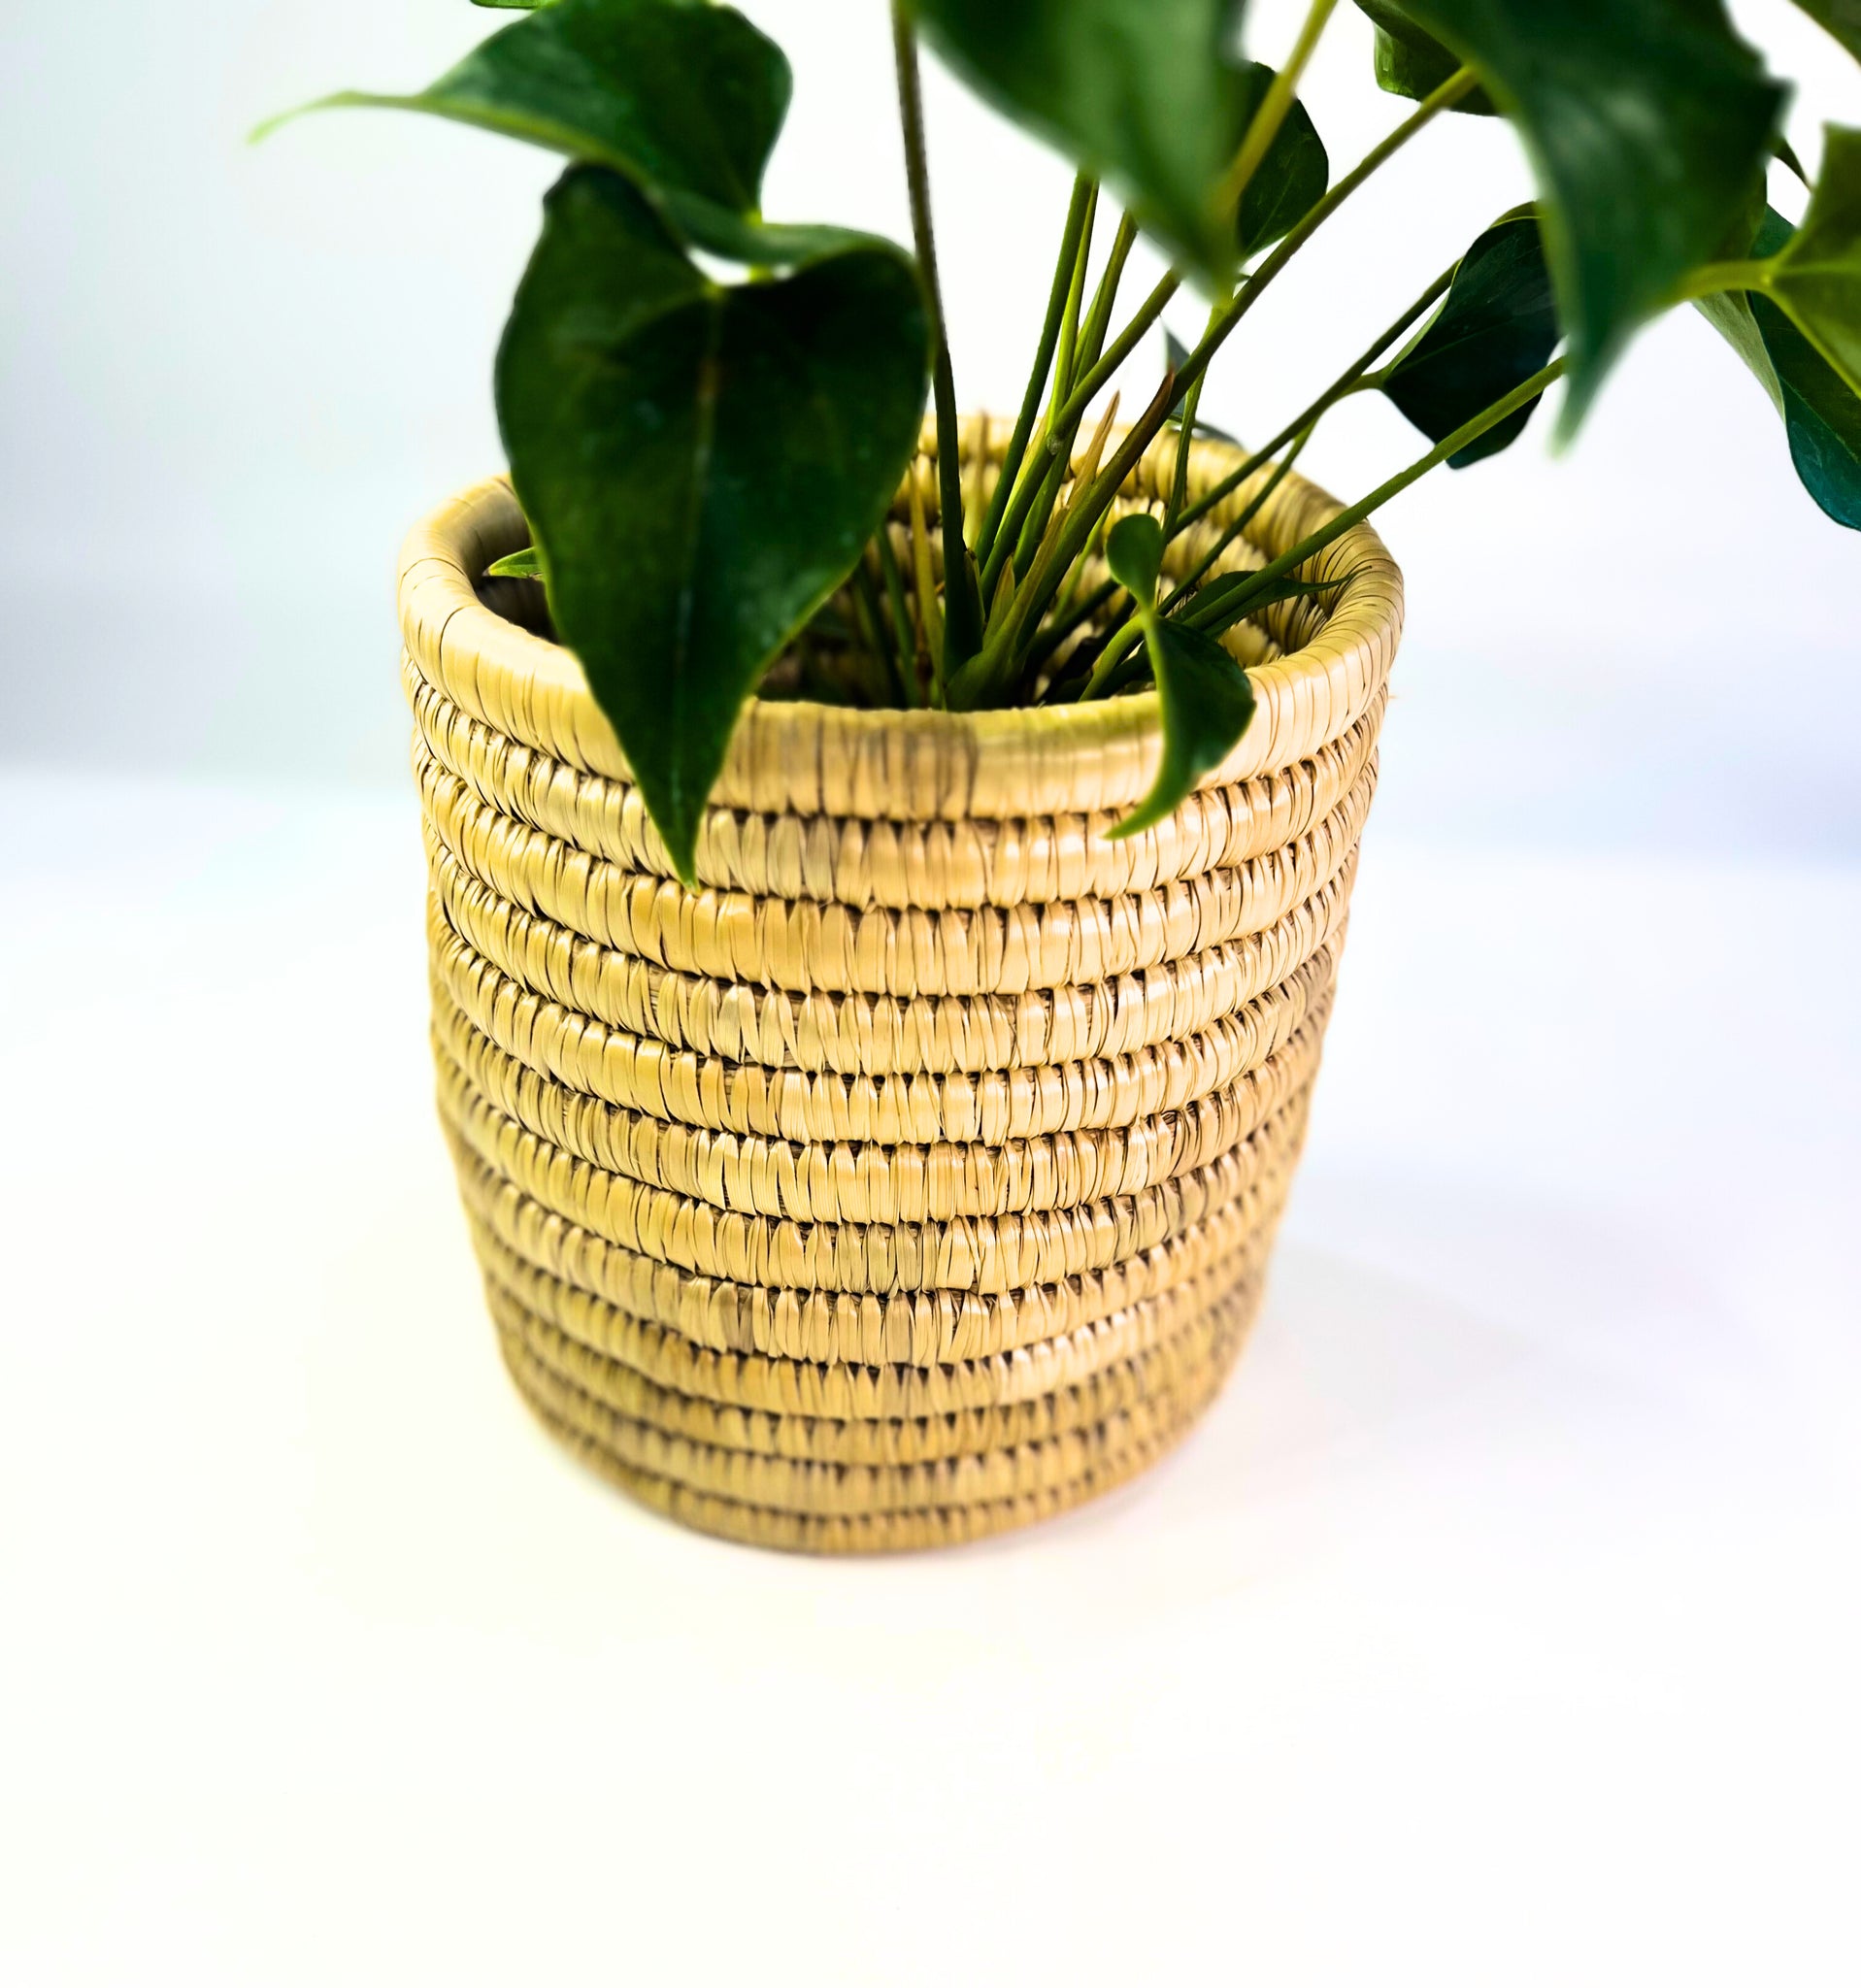 DATE PALM PLANTER HANDMADE STYLISH HOME DECOR INDOOR PLANT ACCESSORY GIFT